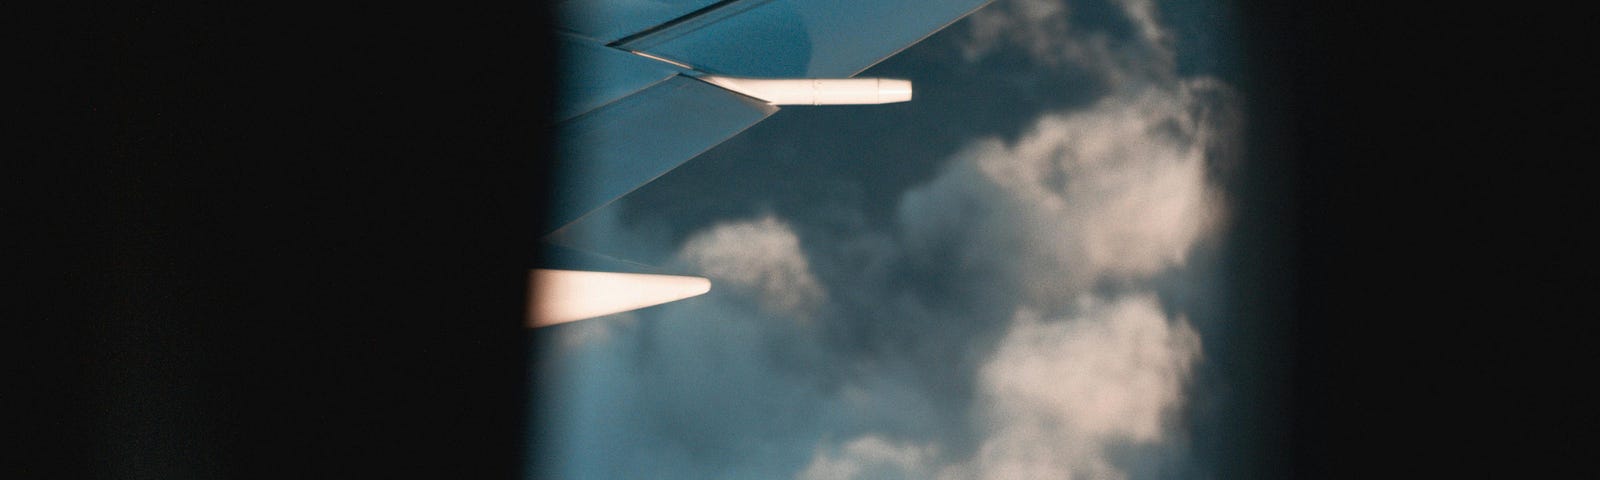 Abstract view of plane wing in clouds